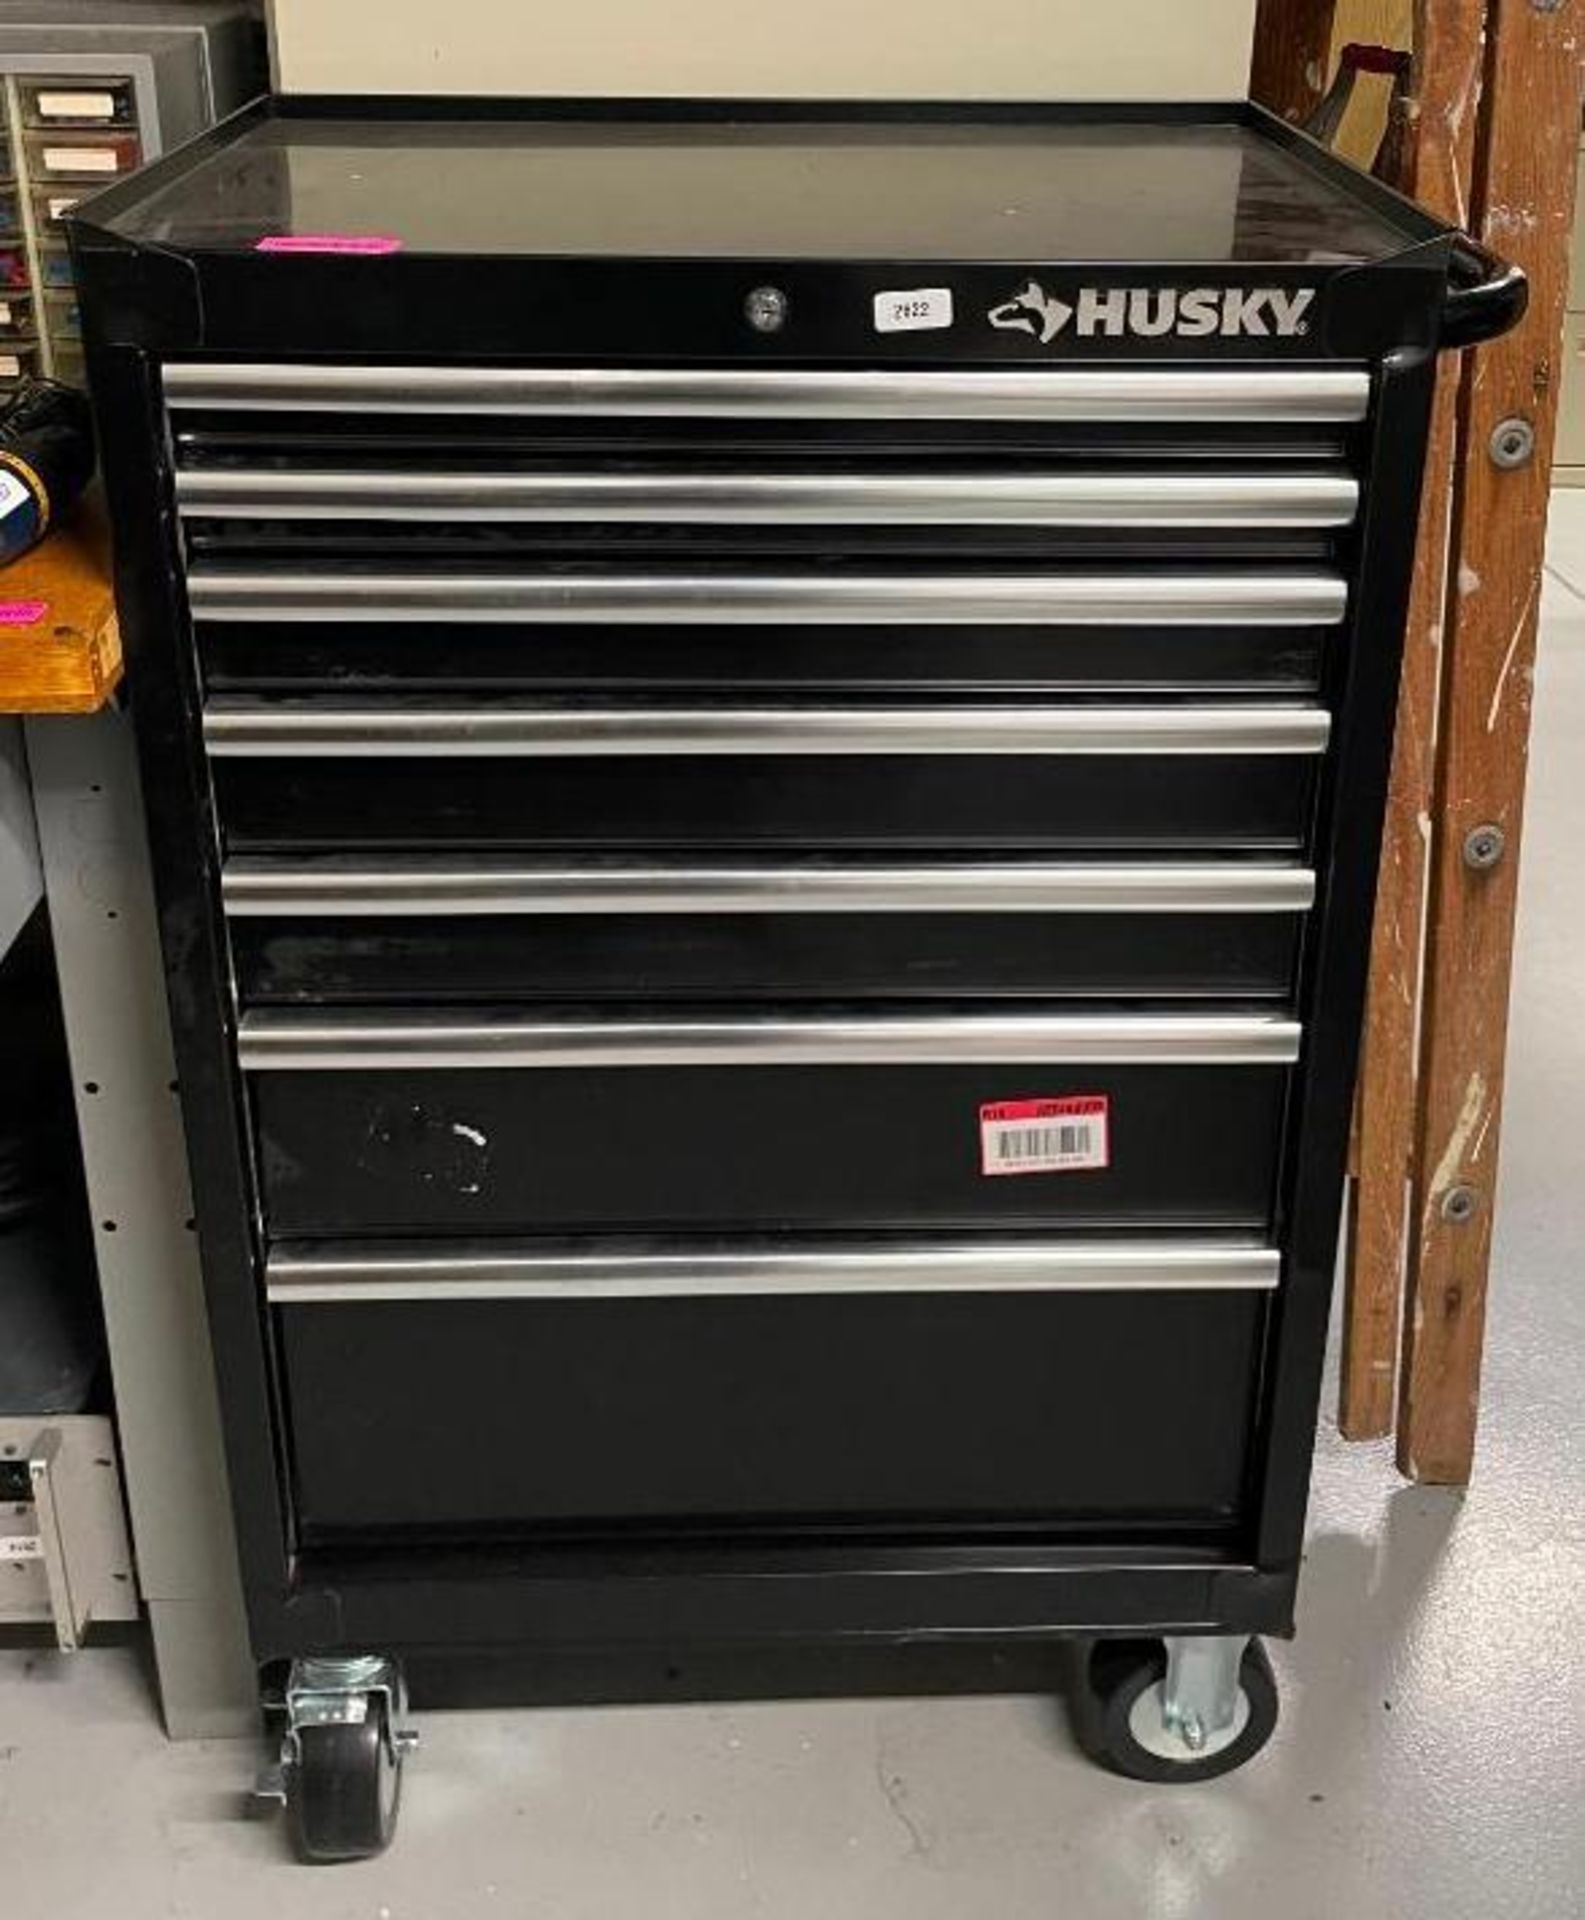 7-DRAWER TOOL CHEST ON CASTERS BRAND/MODEL: HUSKY INFORMATION: WITH CONTENTS - SEE PHOTOS QTY: 1